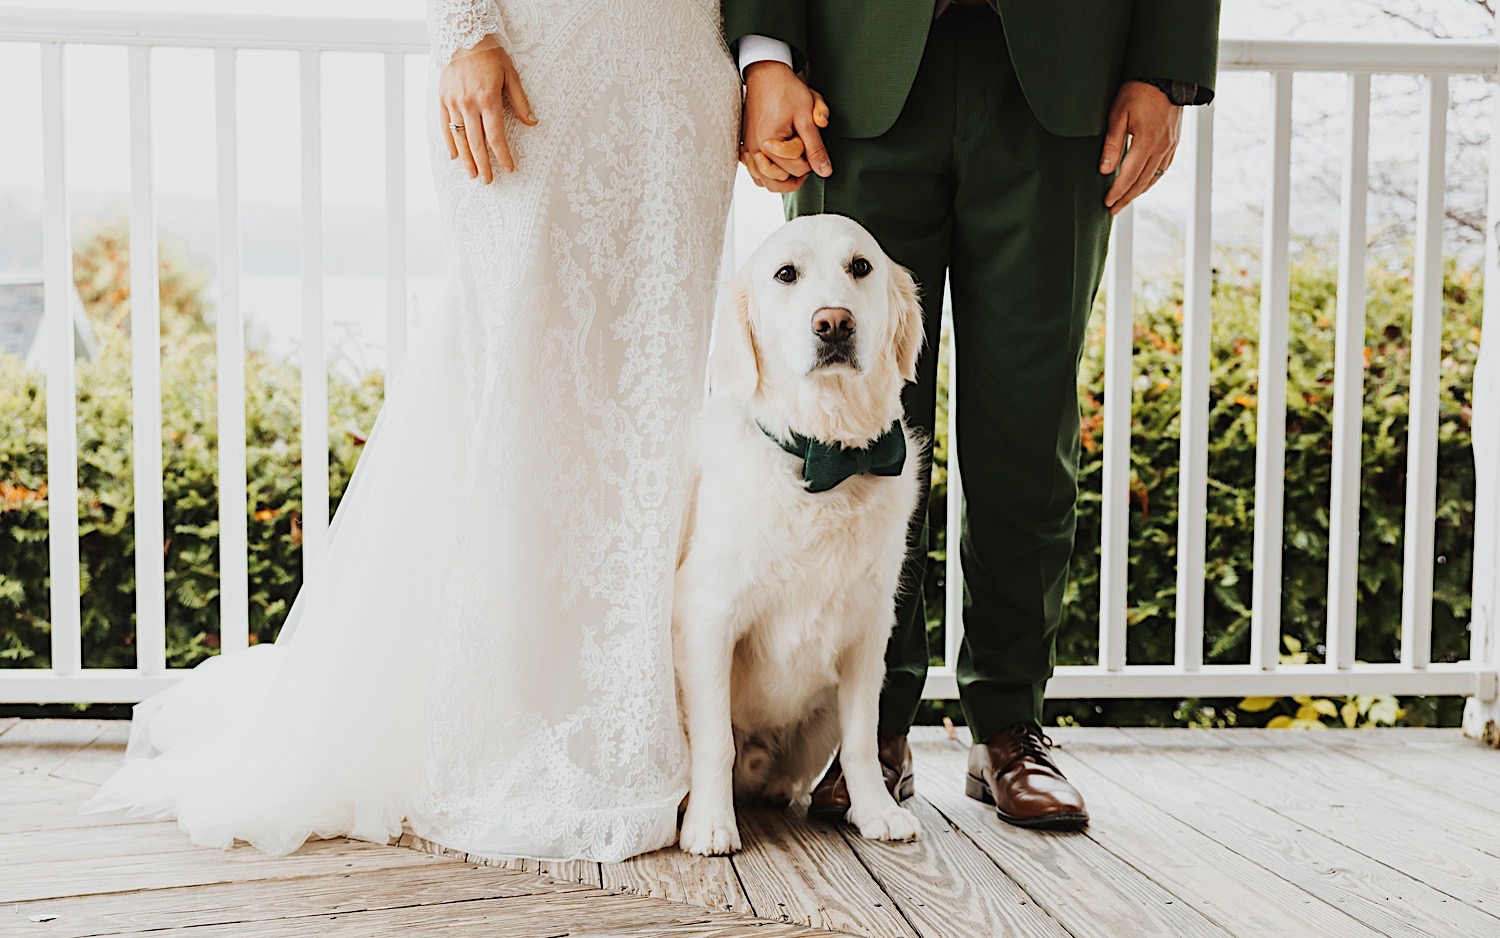 A dog sits in between a bride and groom and looks at the camera while the two stand for a portrait photo on the front porch of a home